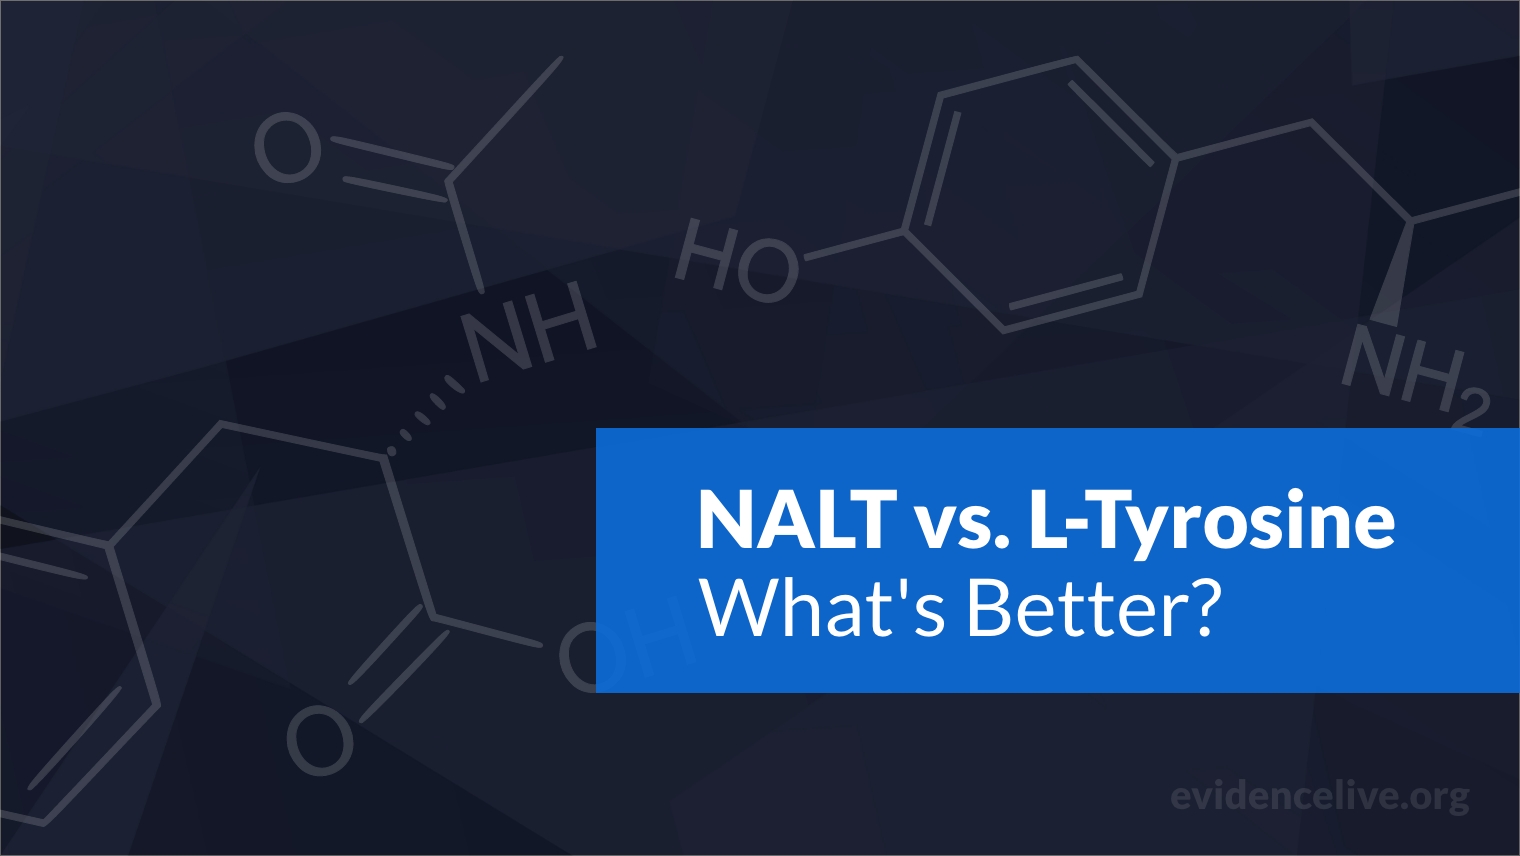 N-Acetyl-L-Tyrosine vs. L-Tyrosine: Differences and What’s Better